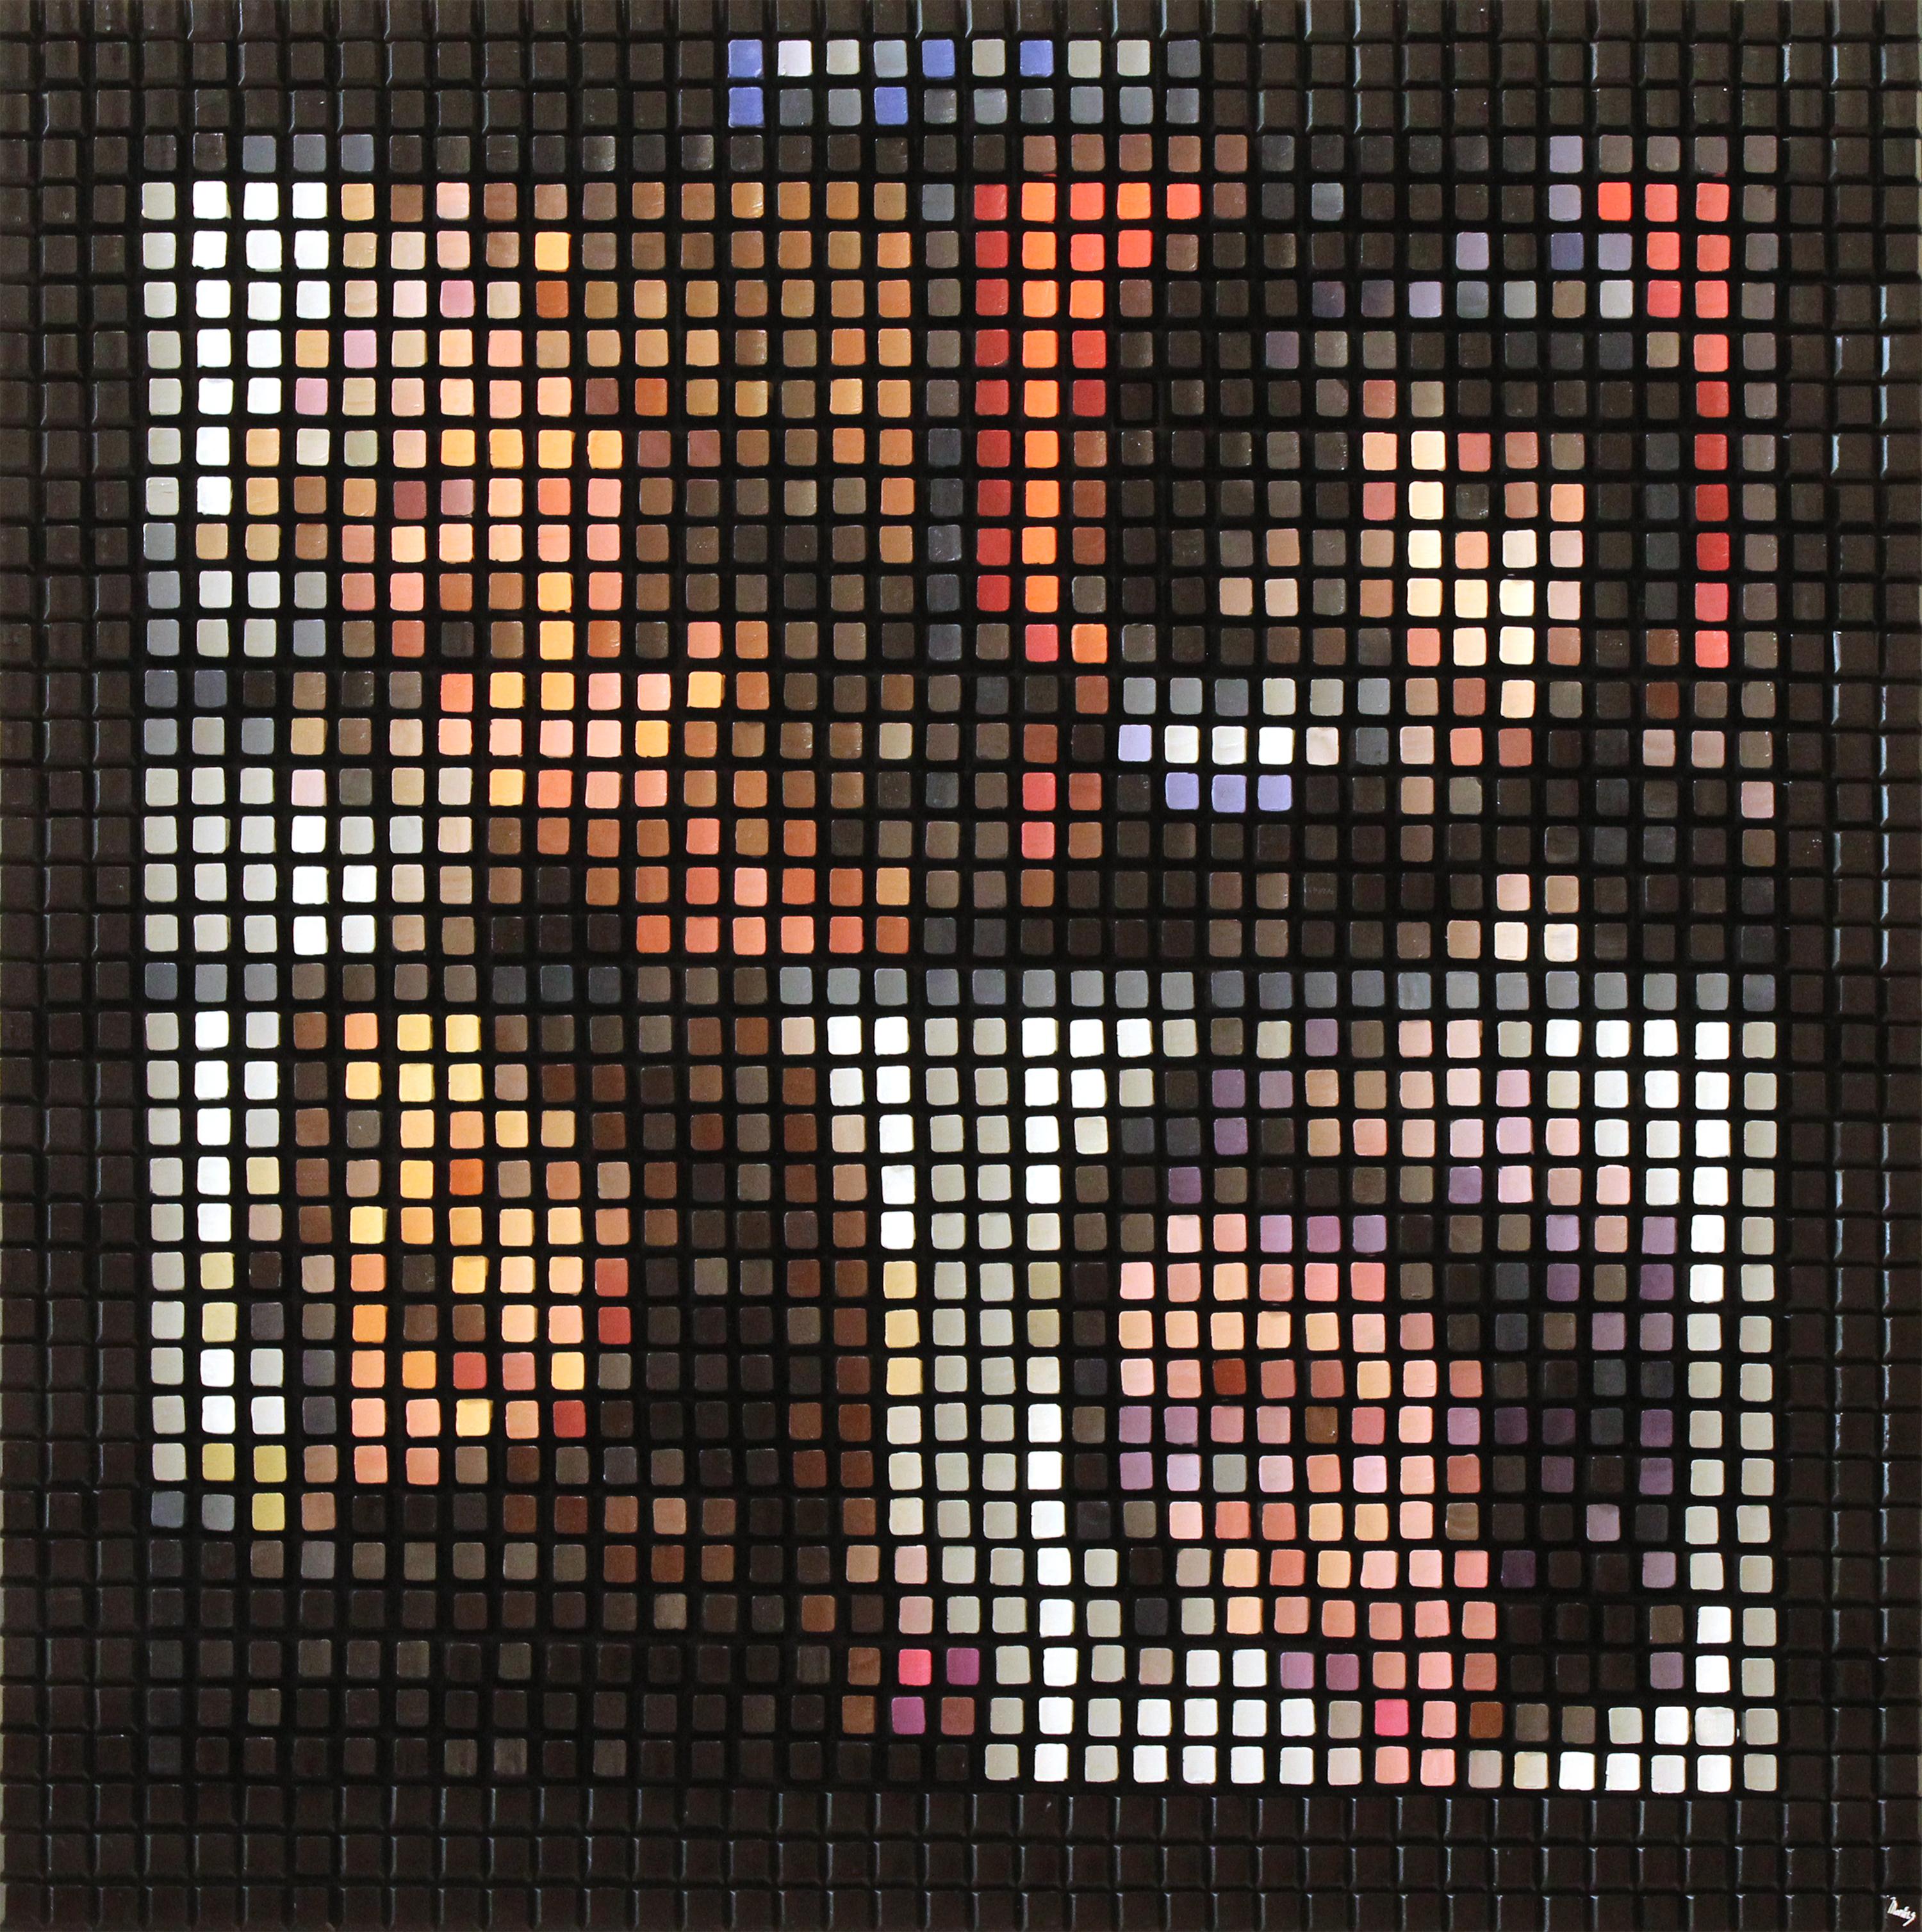 Pixel Remaster Series: The Beatles, Acrylic and Keyboard Keys on Panel - Mixed Media Art by Georges Monfils